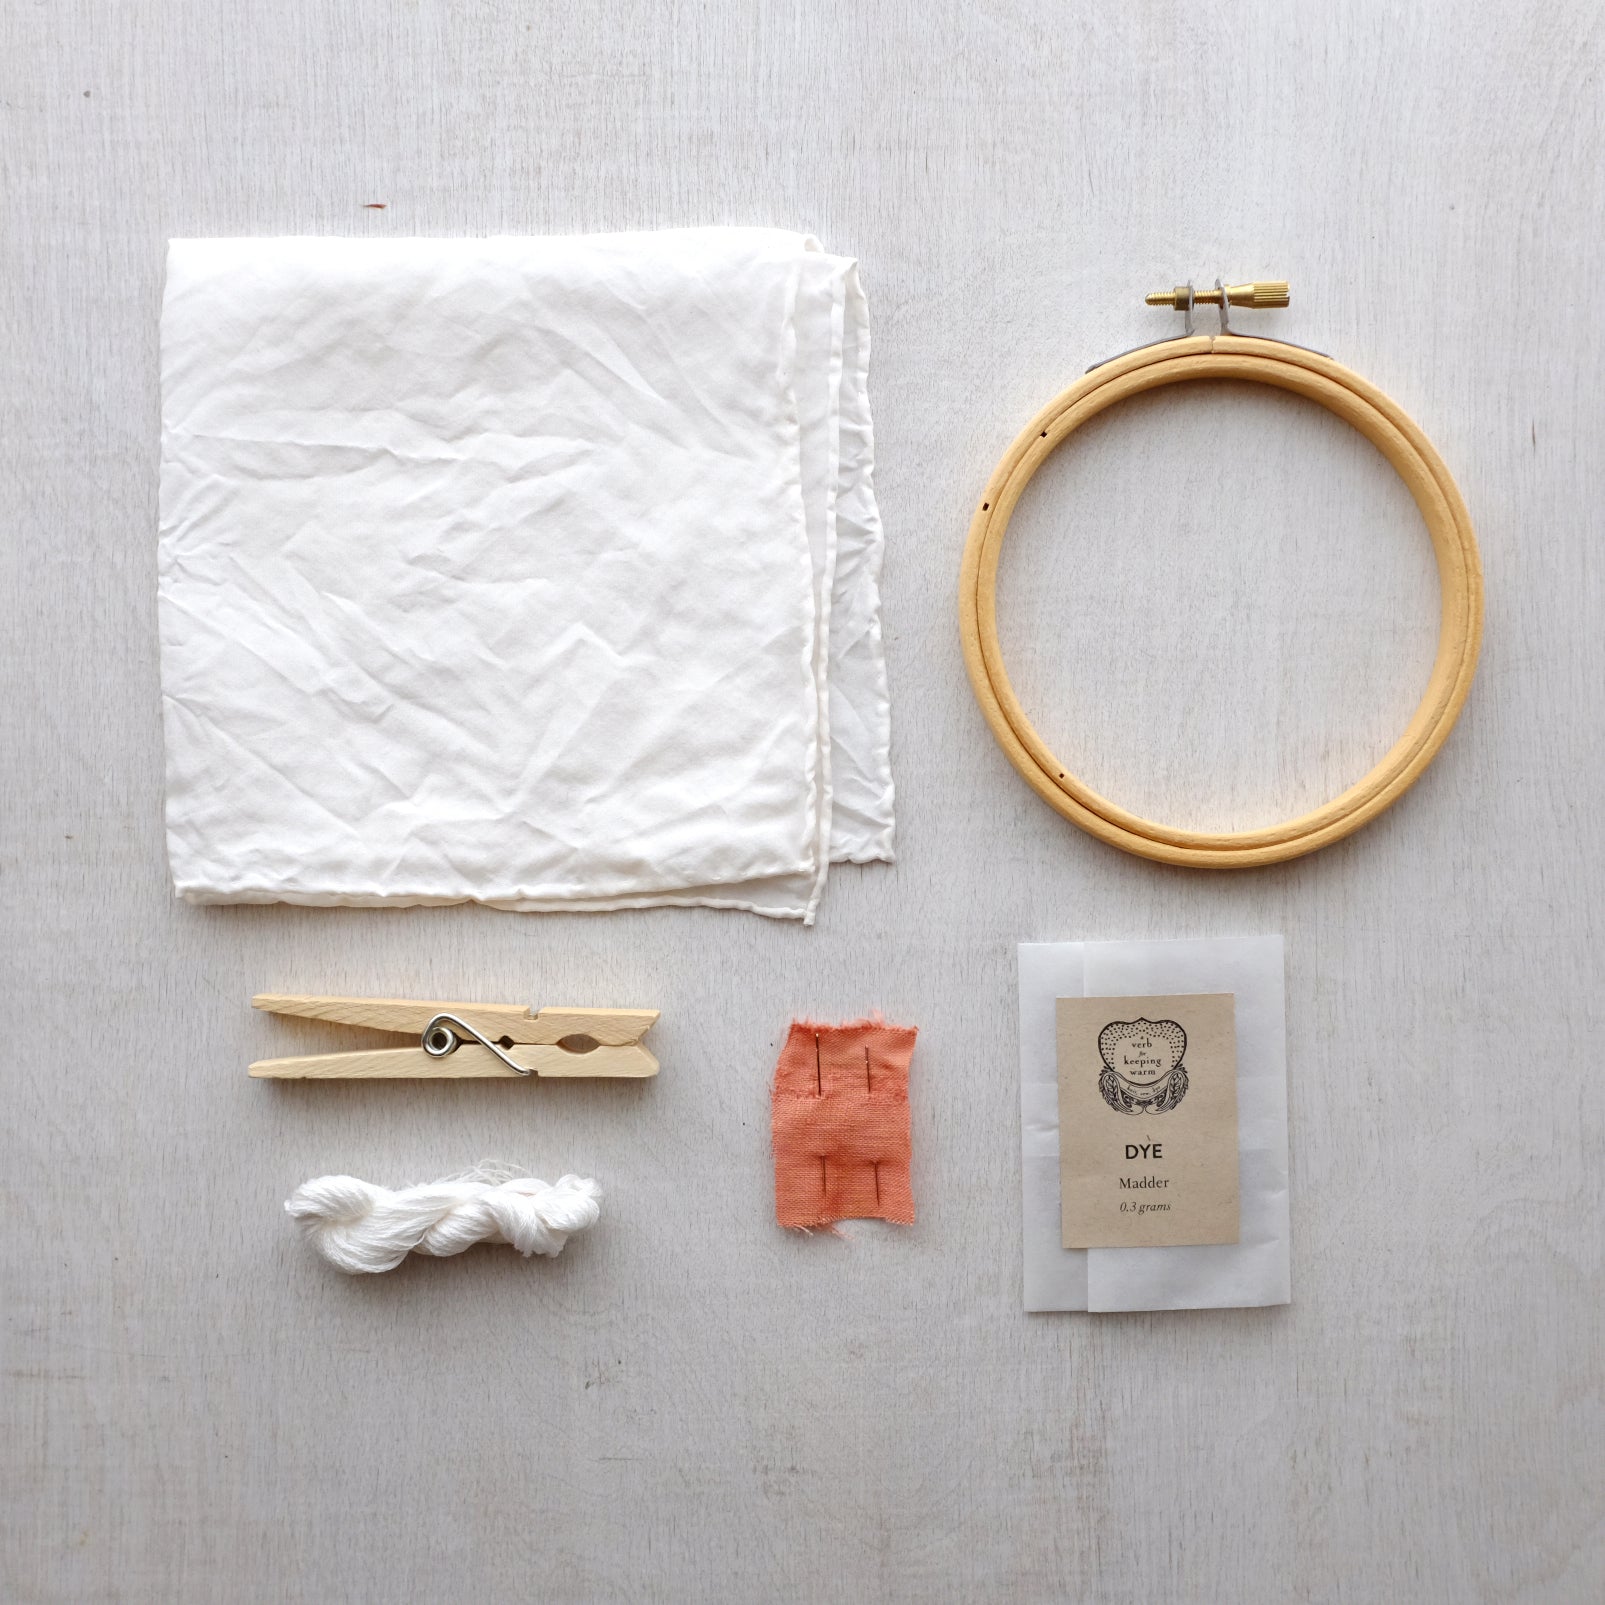 AVFKW x Making Magazine - Winter’s Sunset Naturally-Dyed and Embroidered Silk Handkerchief Bundle